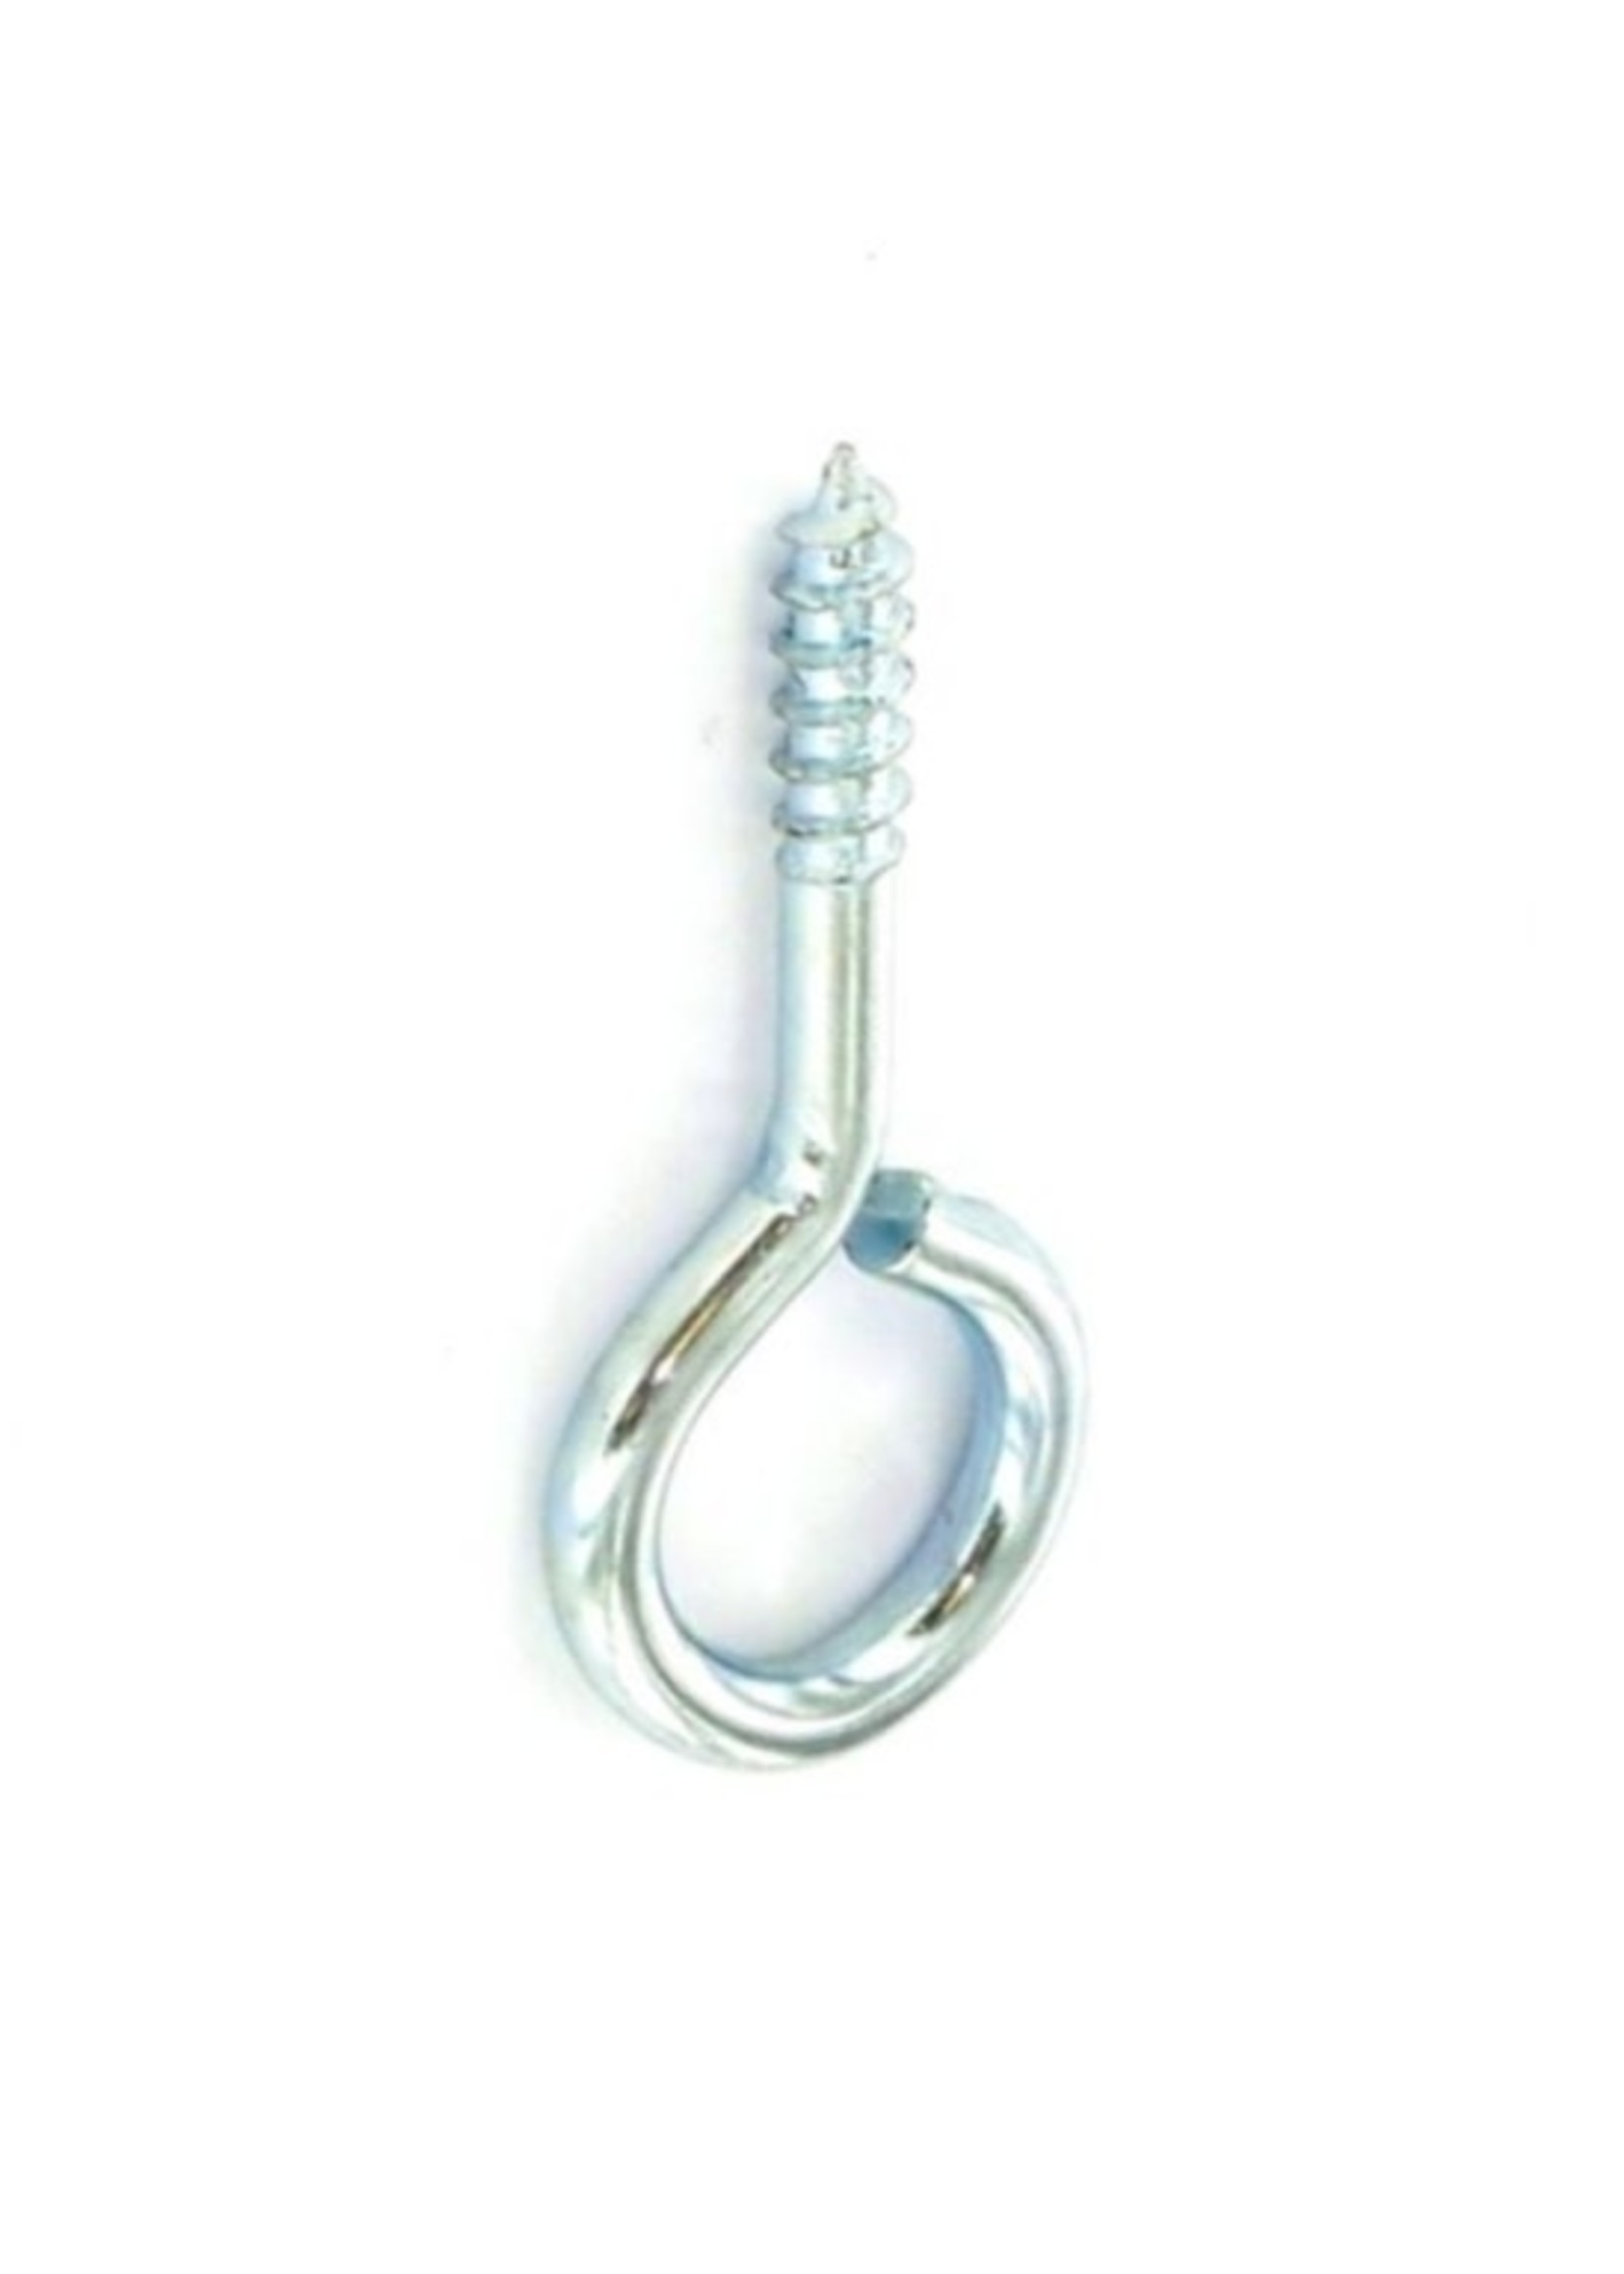 Securit Securit Screw Eyes Zinc Plated 40mm (6 Pack) S6254